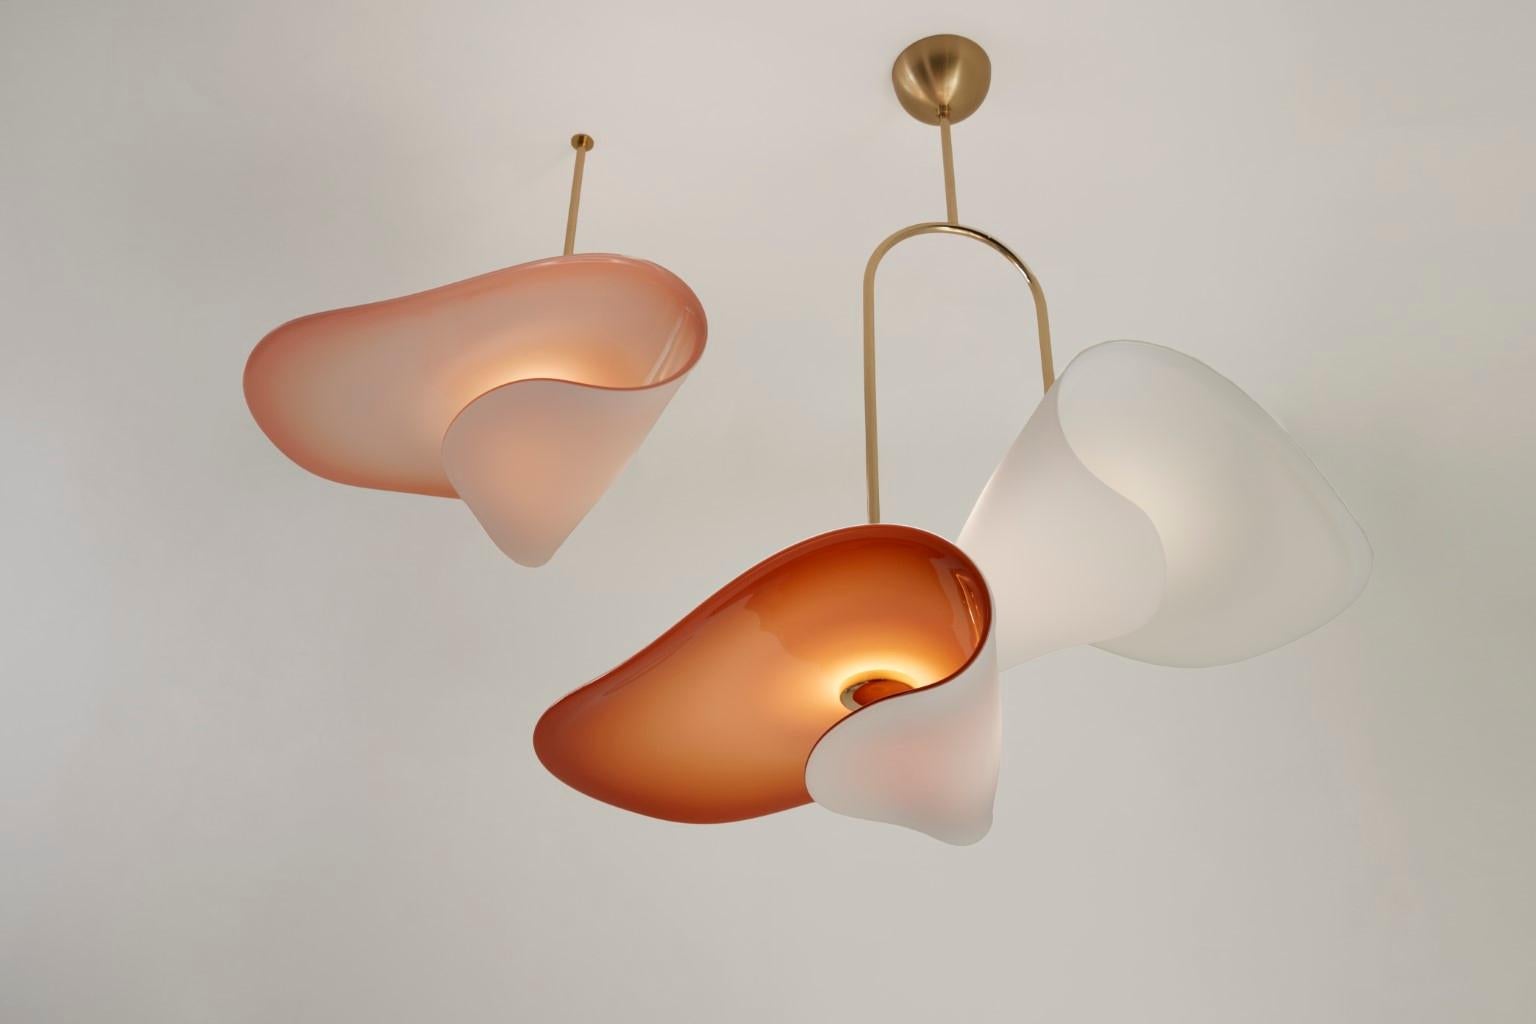 Post-Modern Brume Pendant Light by Mydriaz For Sale